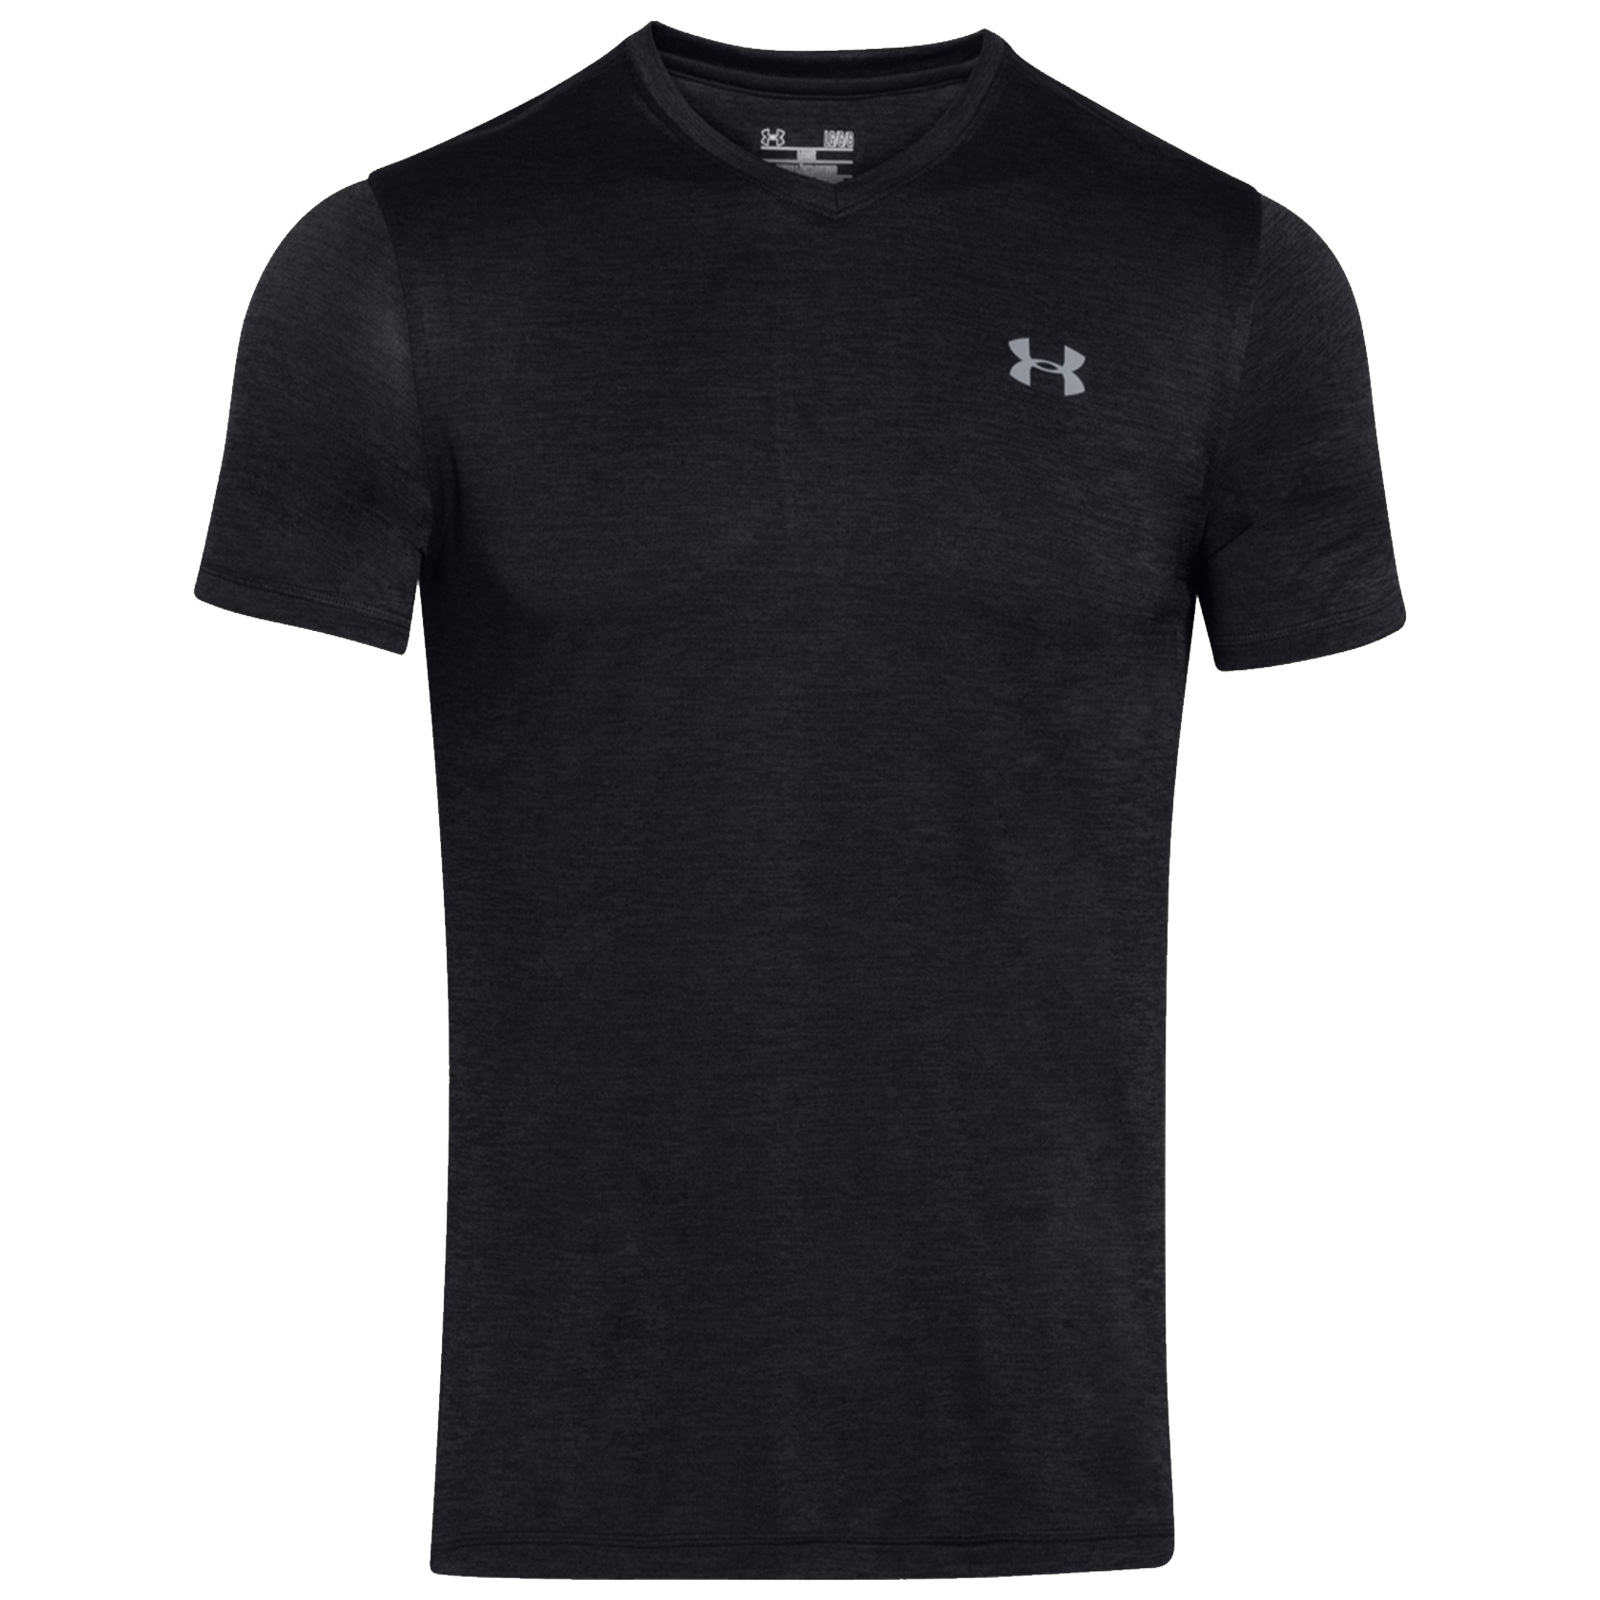 L Under Armour Sportstyle Core Mens Short Sleeve Fitness Training T-Shirt